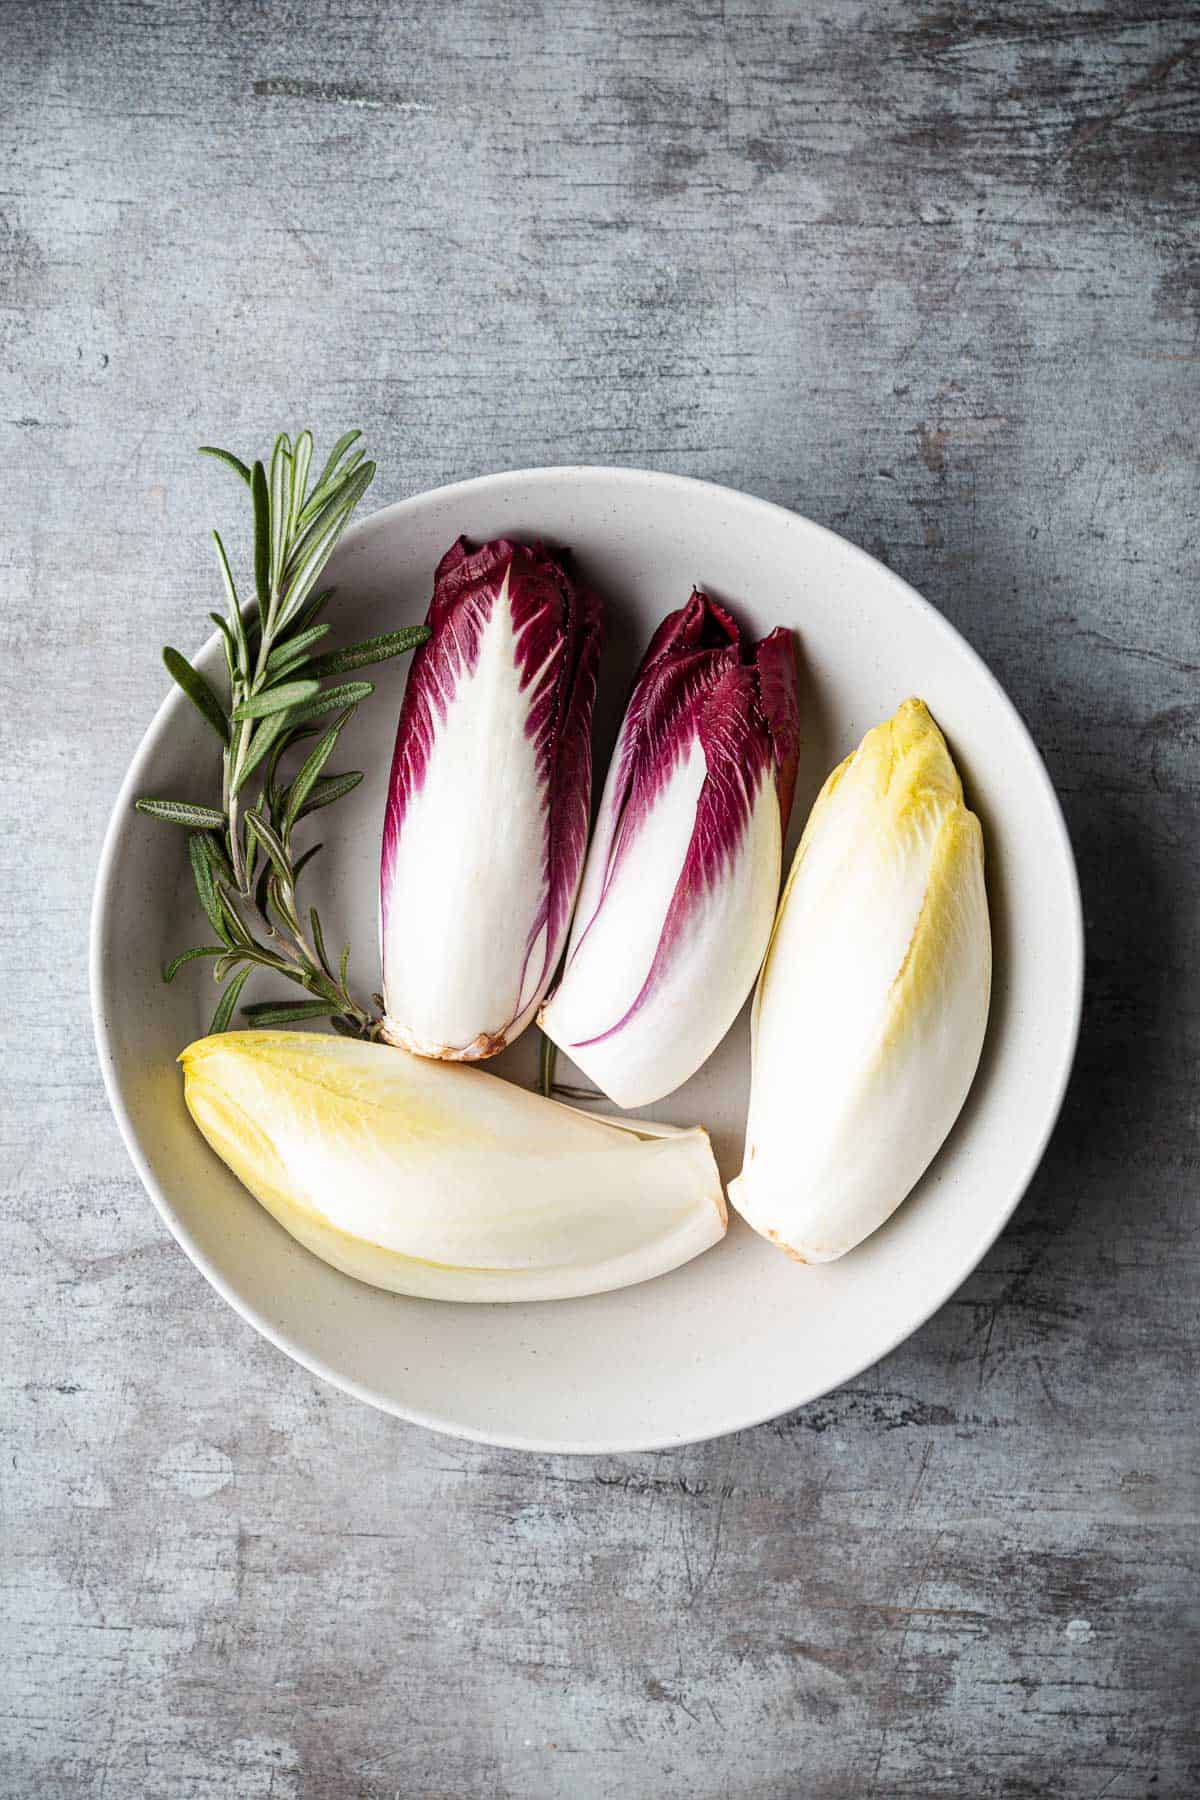 2 heads of red endive, 2 heads of white endive and a sprig of rosemary in a bowl.